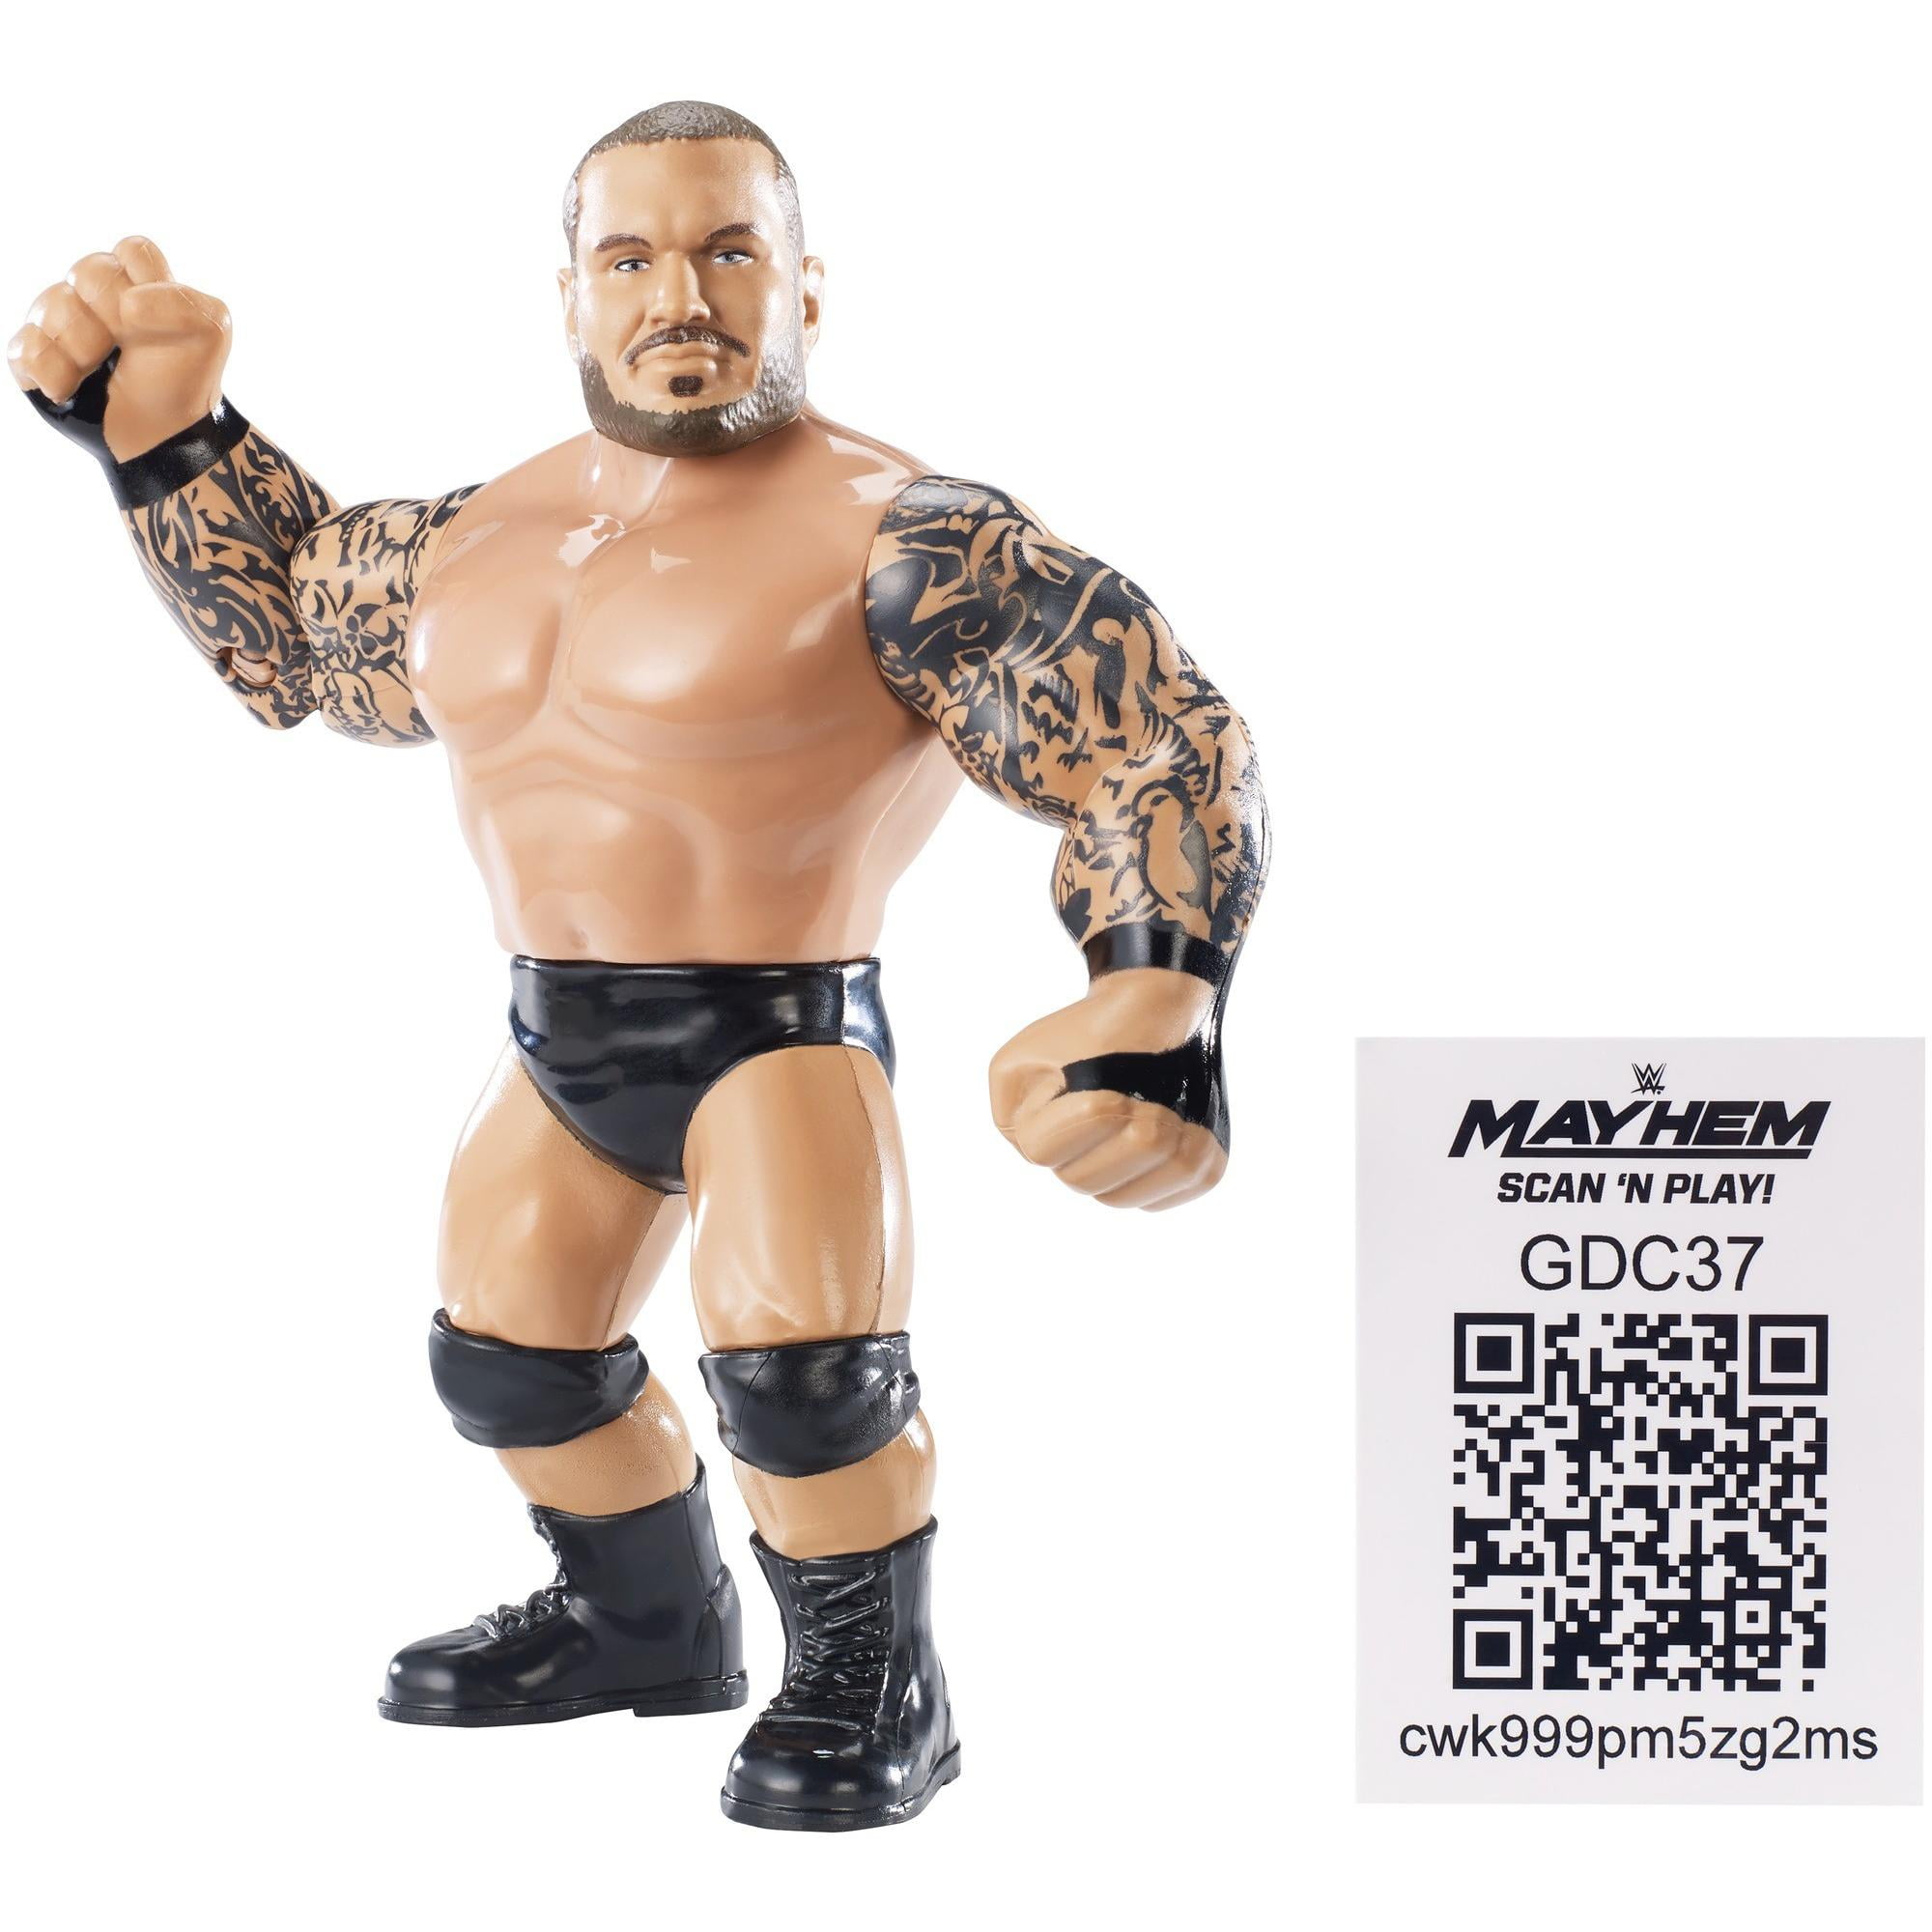 WWE WRESTLING SERIES 1 MASHEMS RANDY ORTON LOOSE NO CAPSULE JUST AS PICTURED